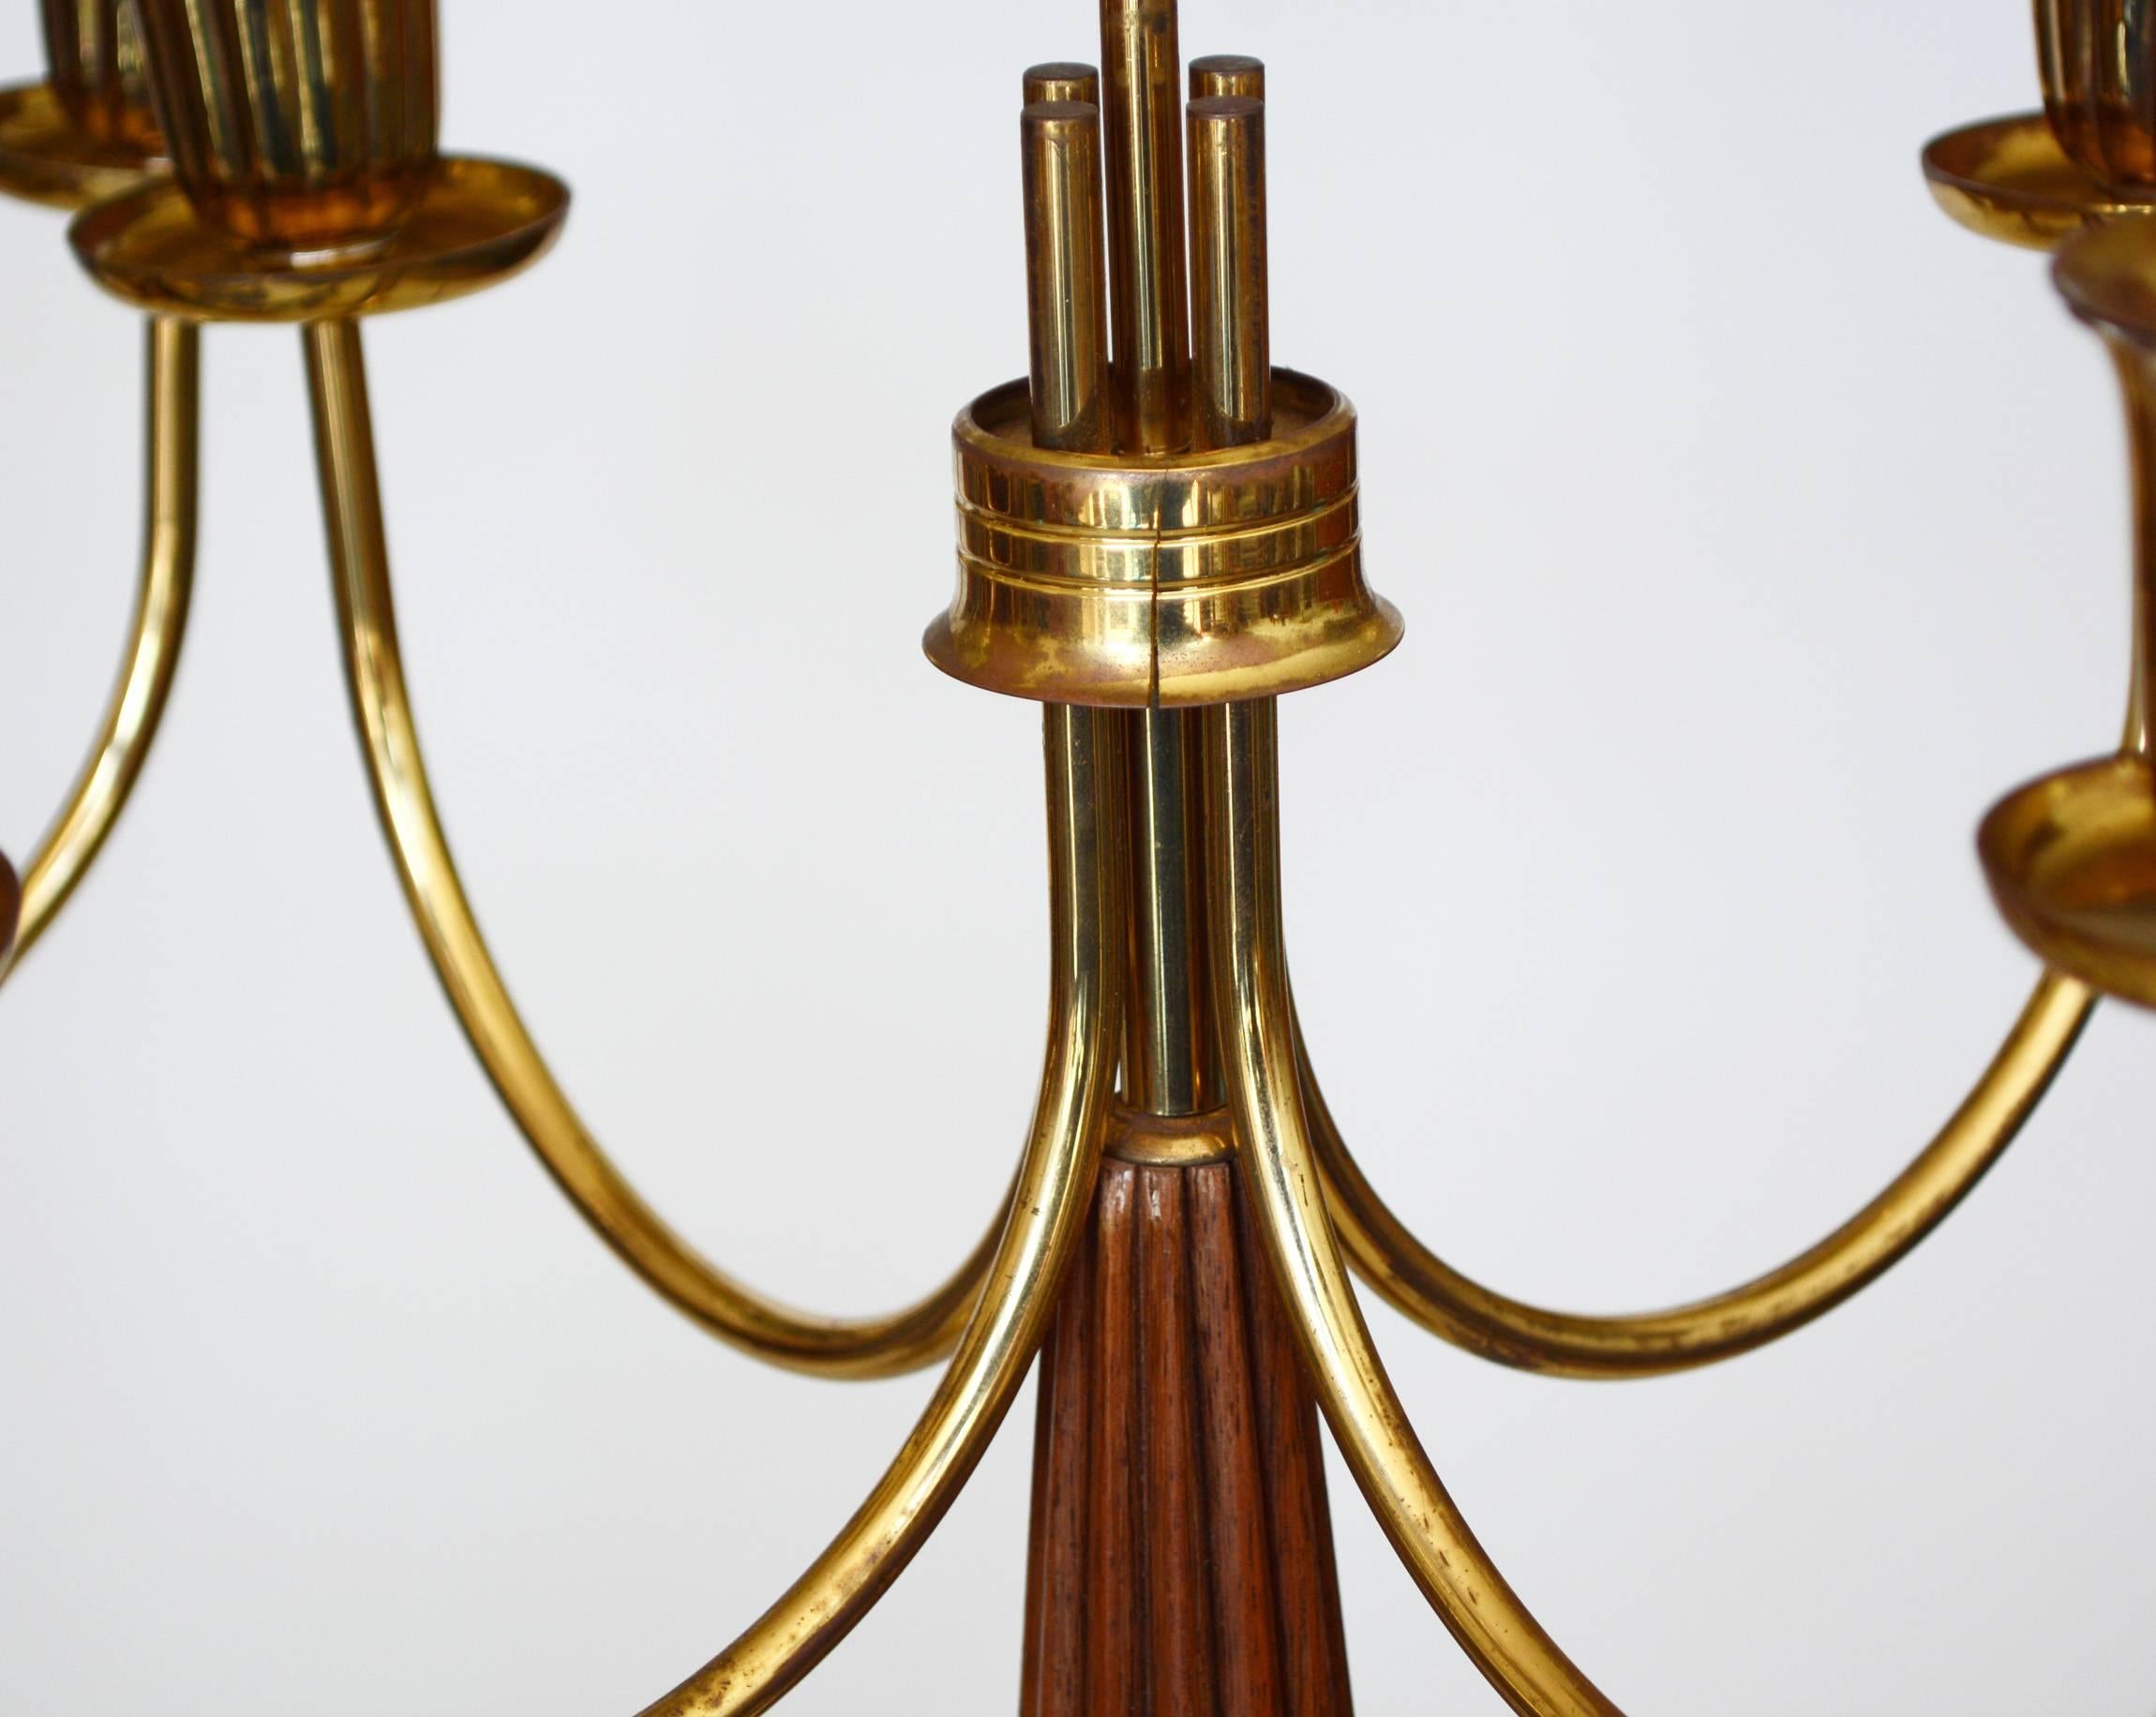 Brass Dorlyn Silversmith Candelabras Attributed to Tommi Parzinger